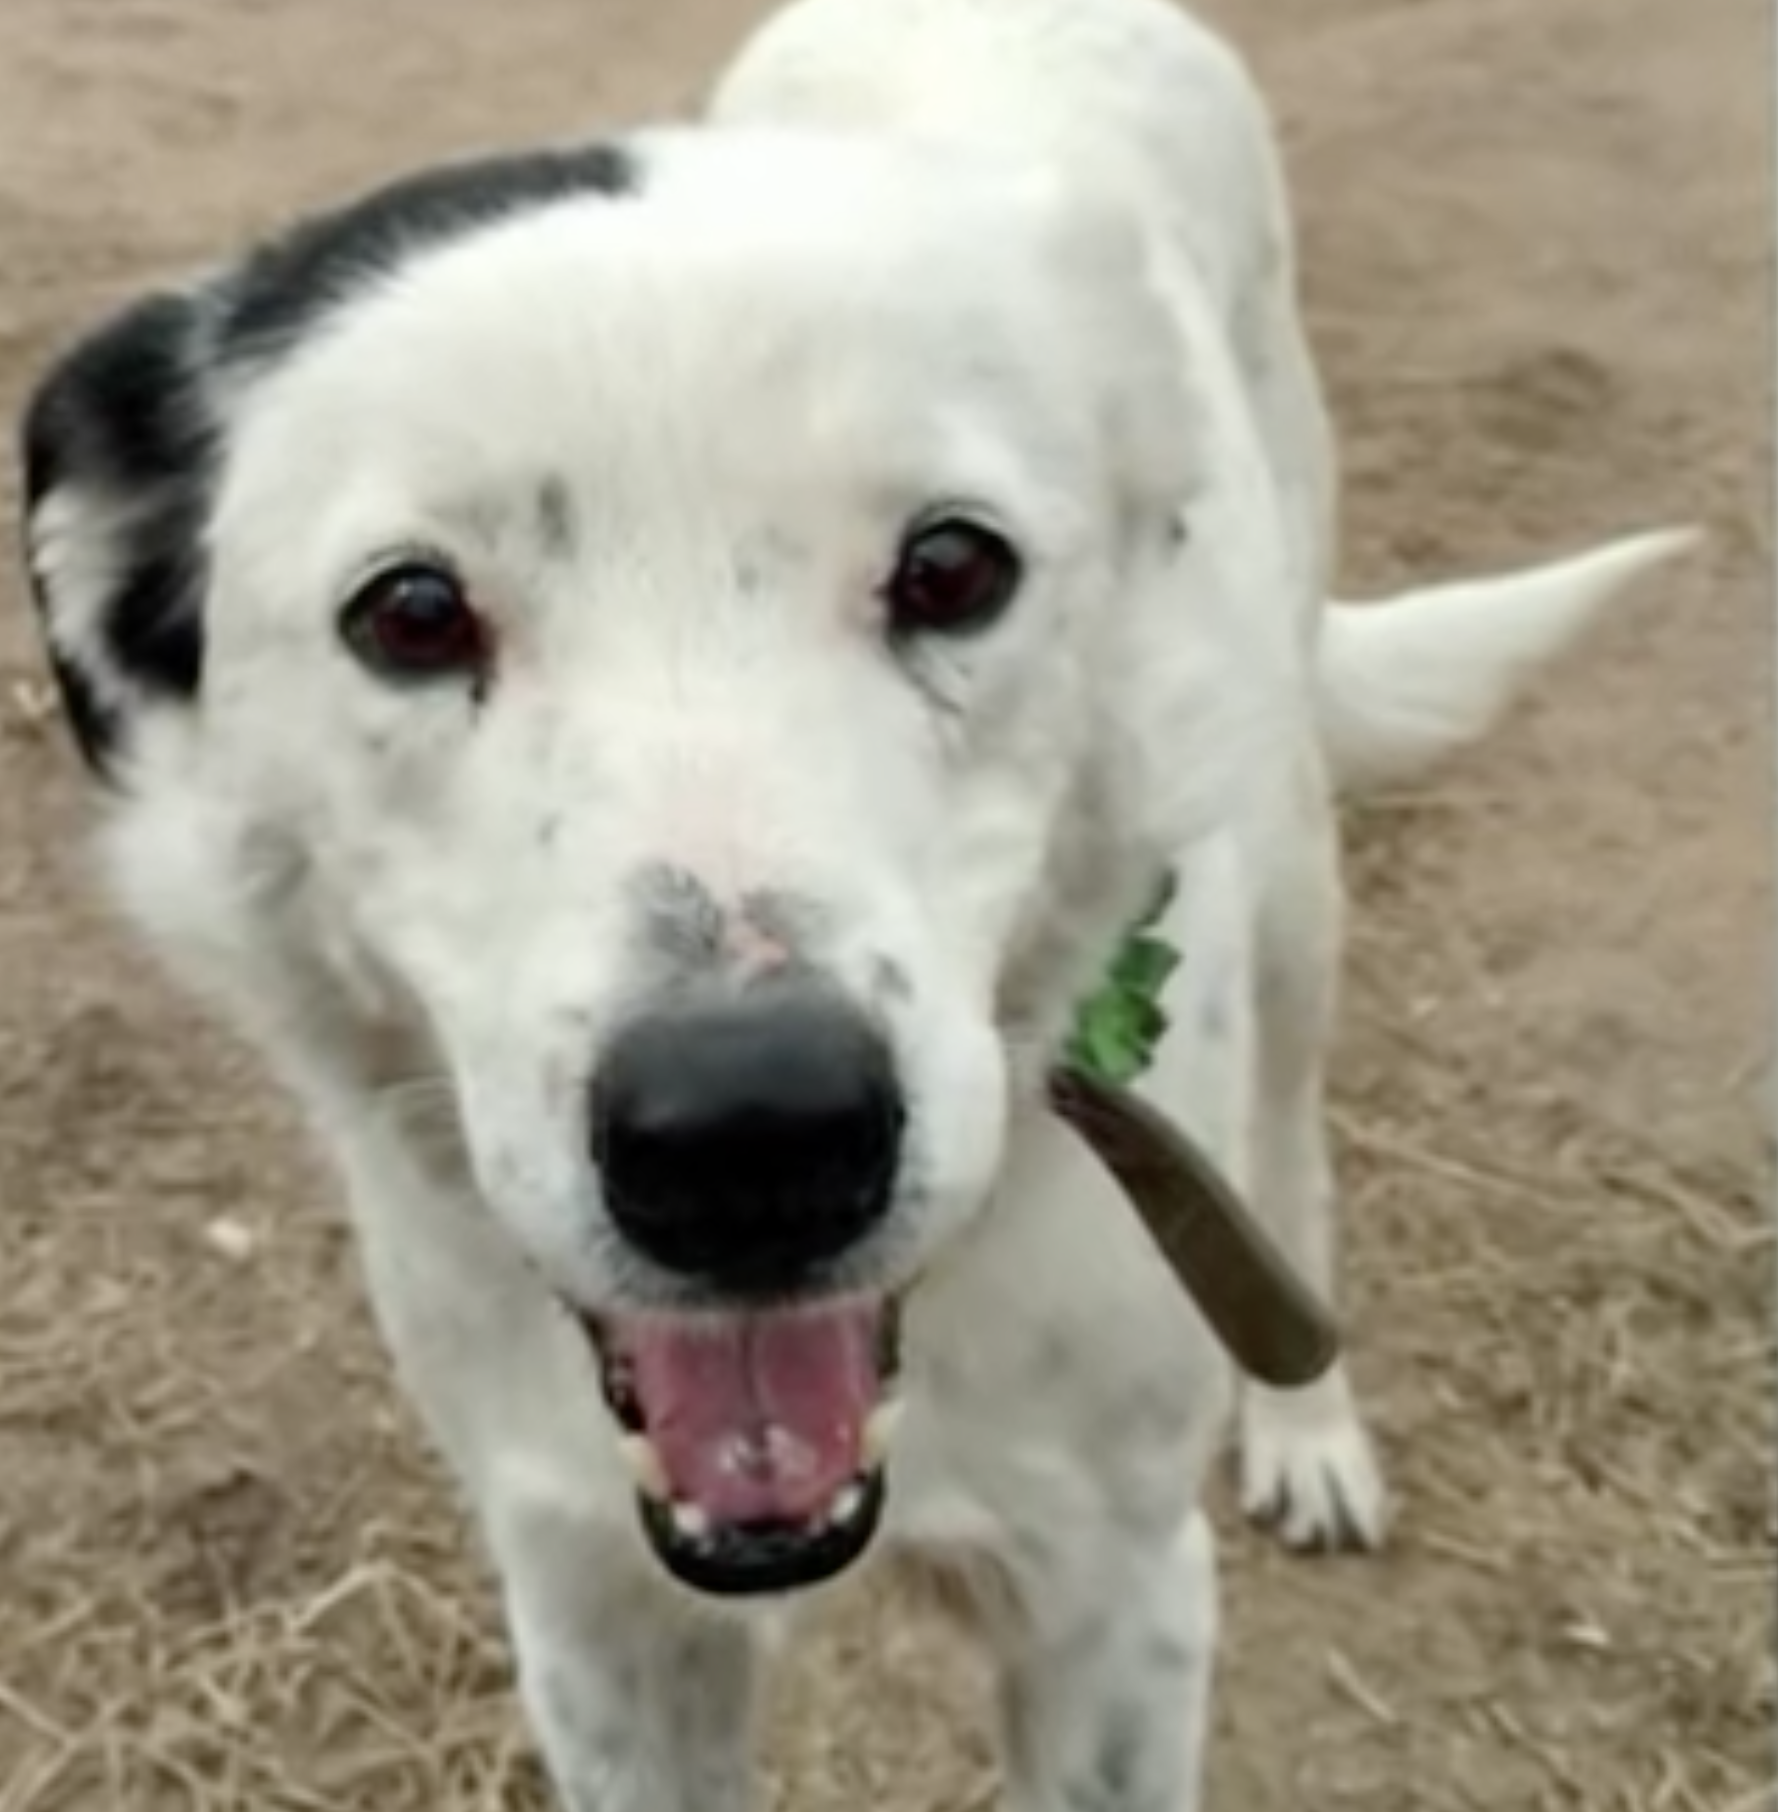 Patches The Dog Finds Her Way Home After Four Years Apart!